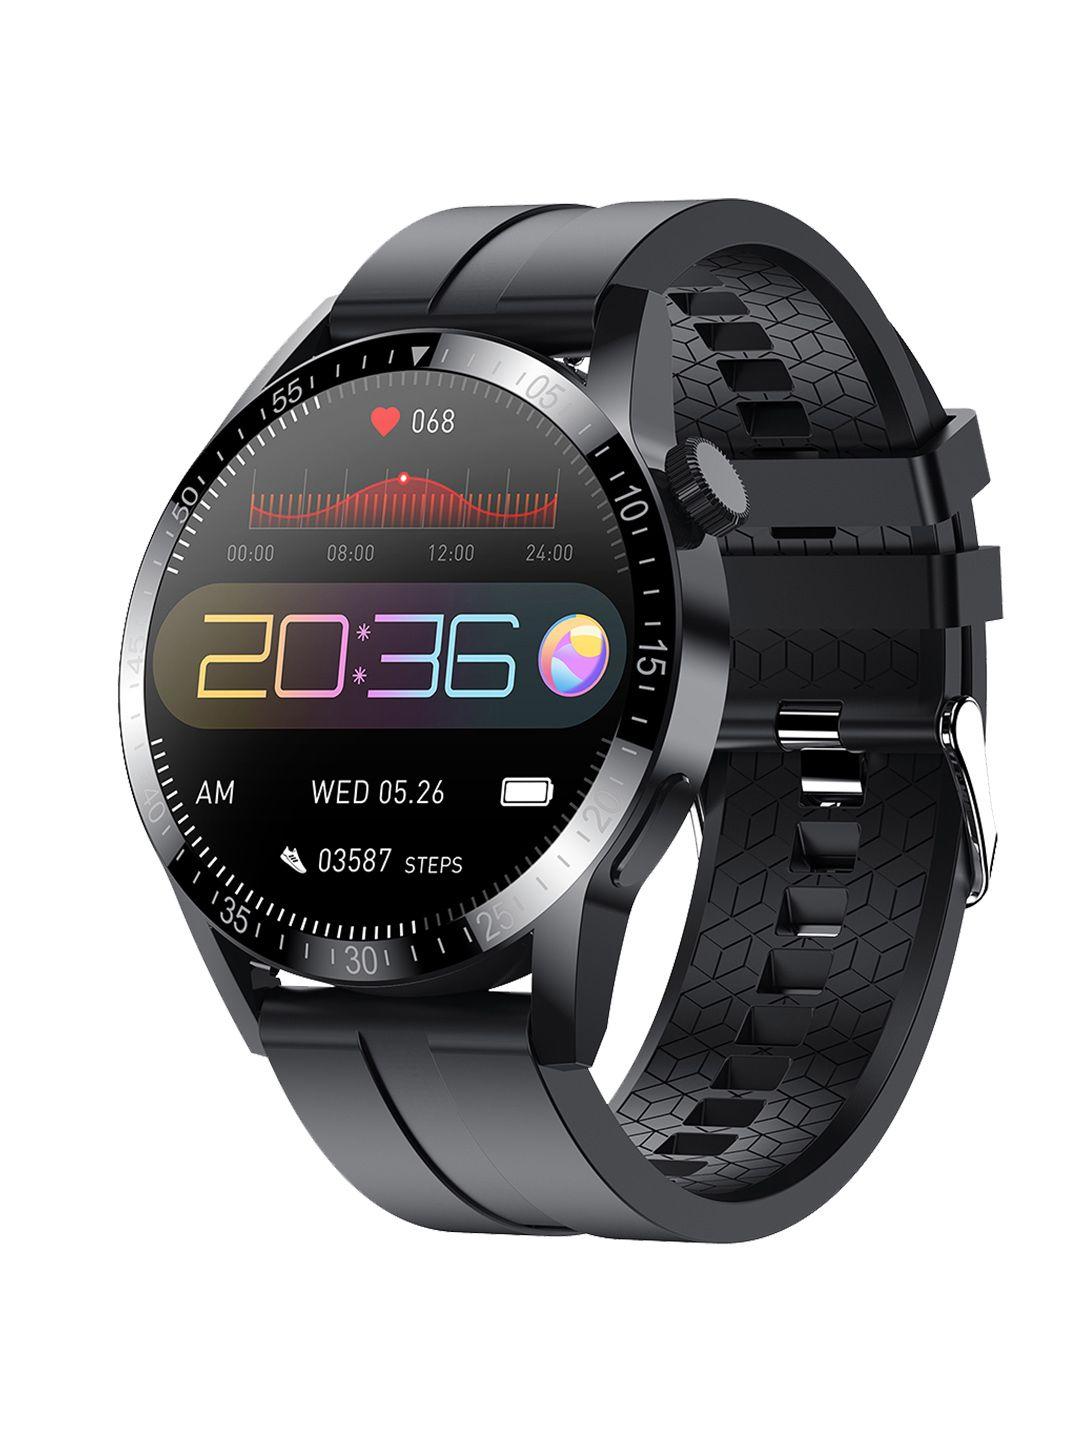 fire-boltt-talk-pro-smart-watch-with-bluetooth-calling--38bswaay-1